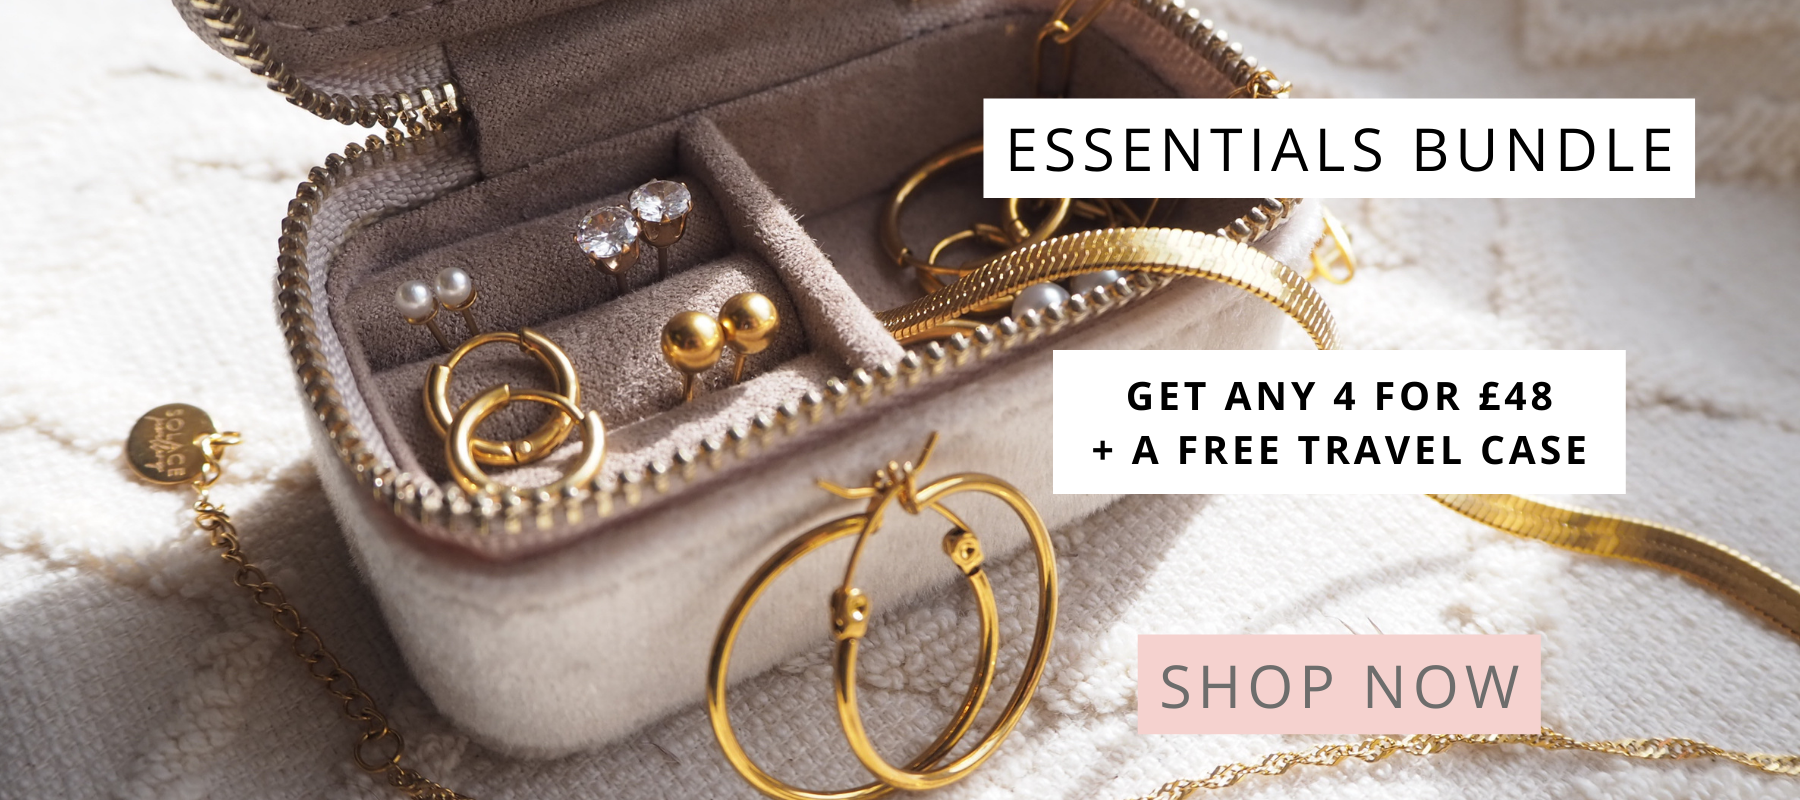 Meet your everyday essentials. With this bundle deal, get any 4 items for £48 plus a free travel case.